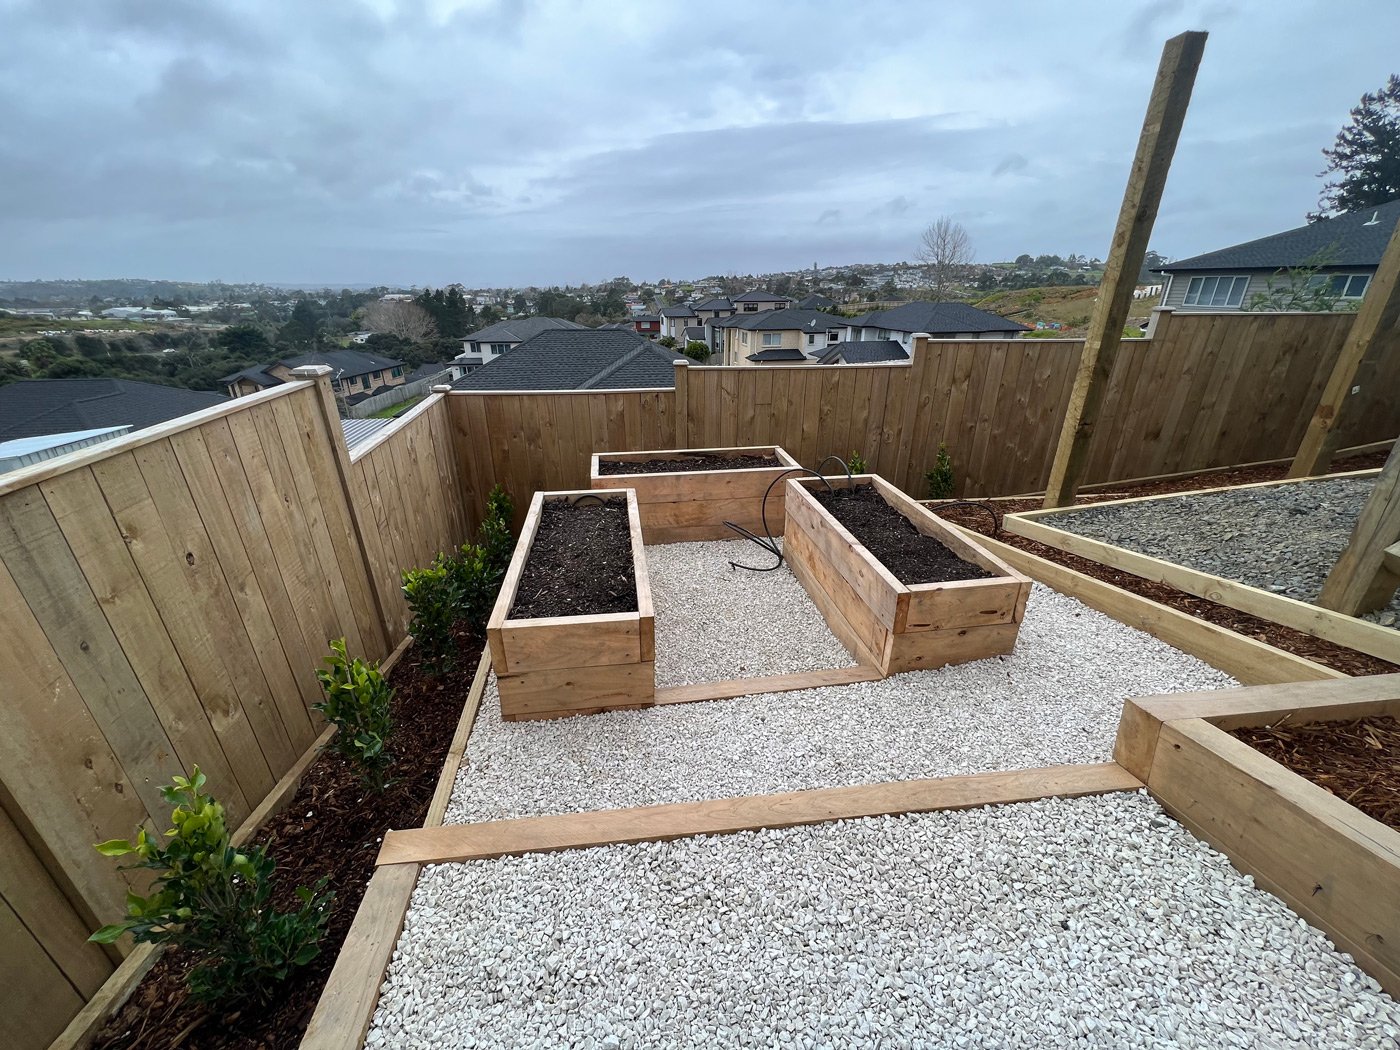 Three newly built vegetable beds raised off the ground in wood casings, surrounded by a white pebble walkway